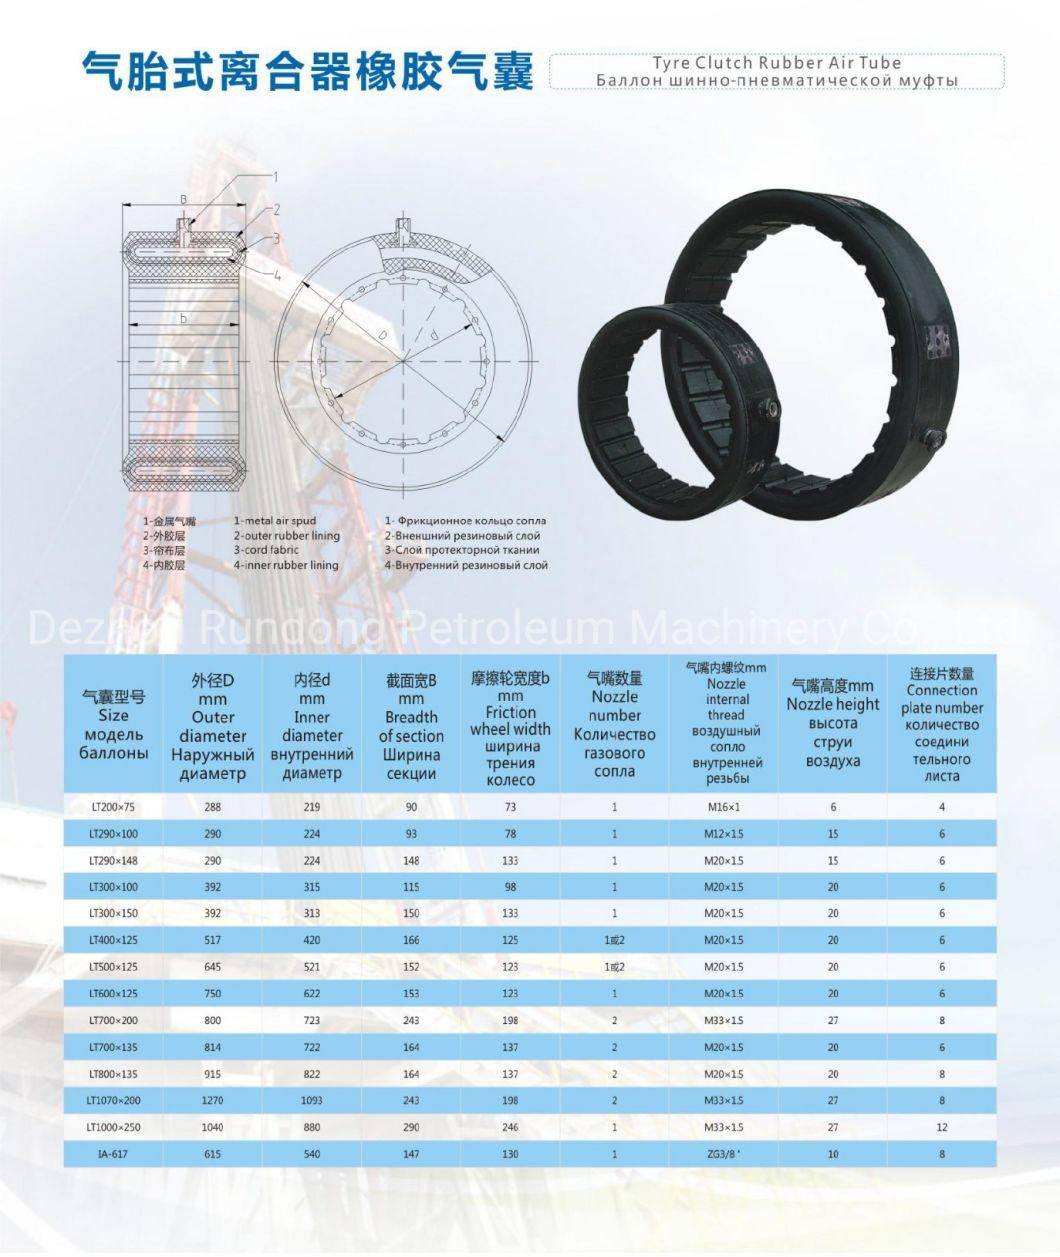 Clutch Rubber Air Tube Used on Common Interchangeable Pneumatic Clutch/ Ventilated Pneumatic Clutch/ CB Clutch